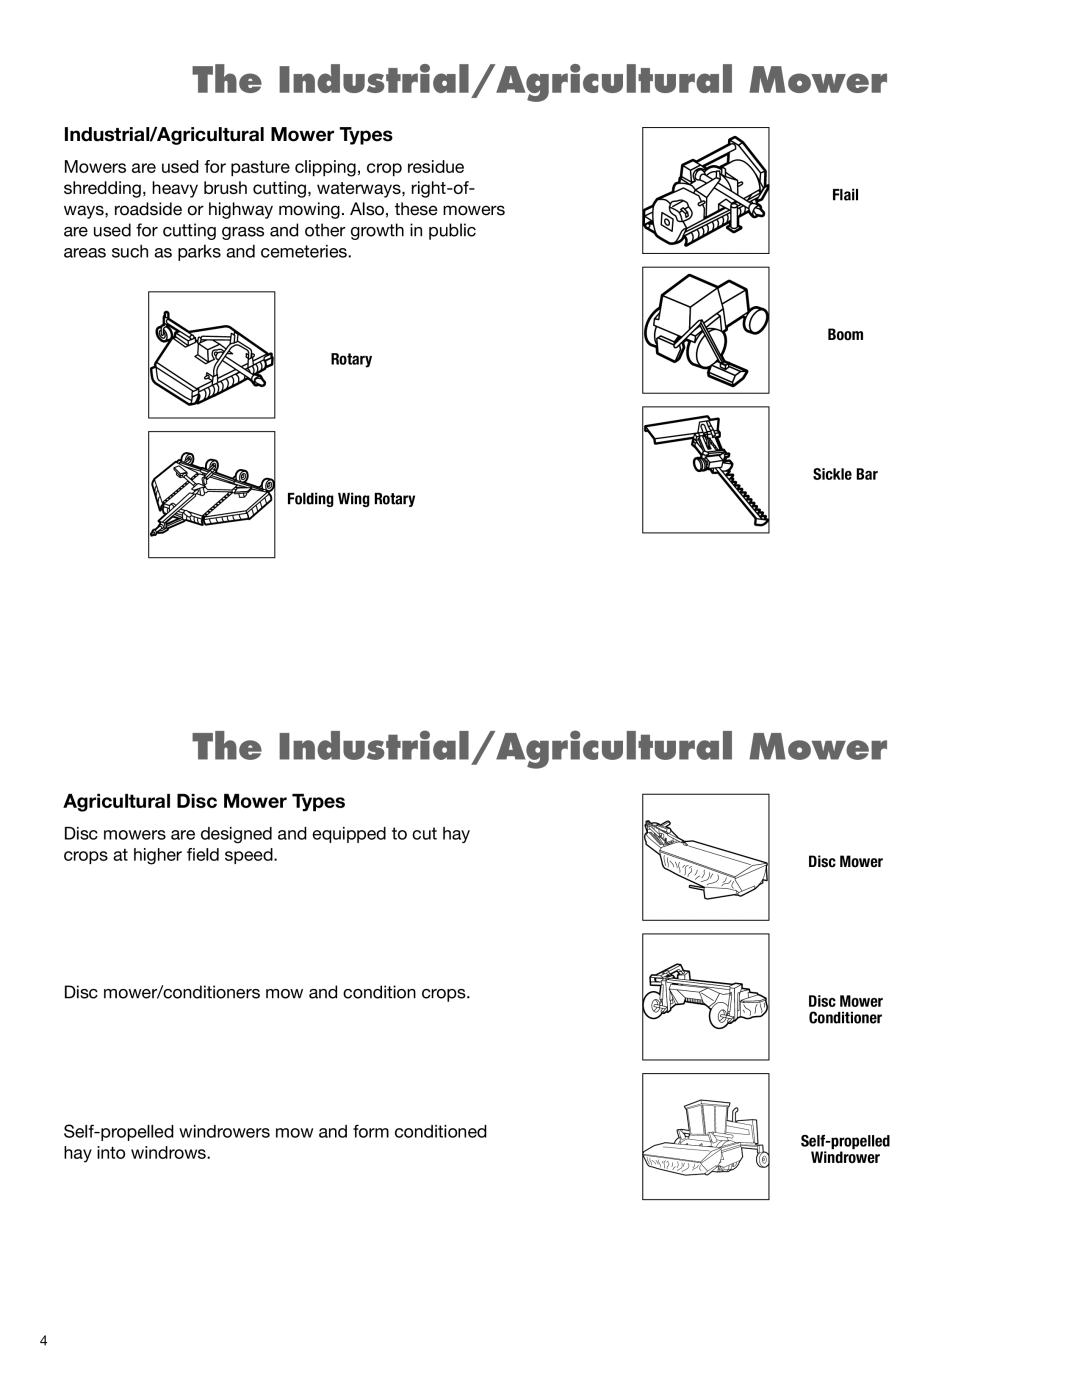 Rhino Mounts 148 The Industrial/Agricultural Mower, Industrial/Agricultural Mower Types, Agricultural Disc Mower Types 